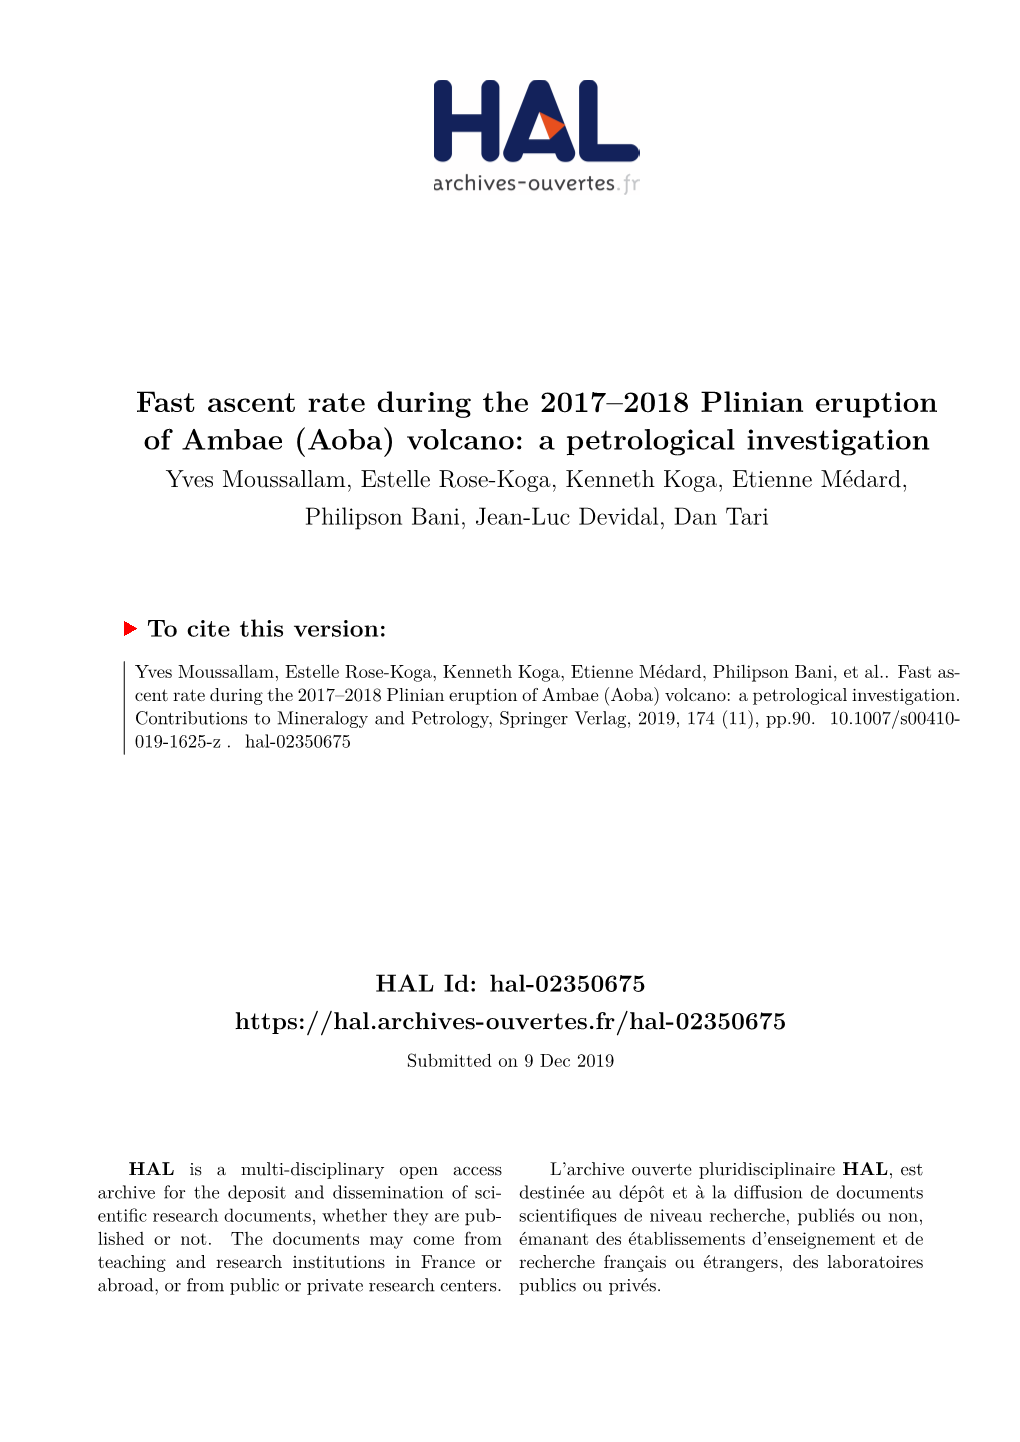 Fast Ascent Rate During the 2017–2018 Plinian Eruption of Ambae